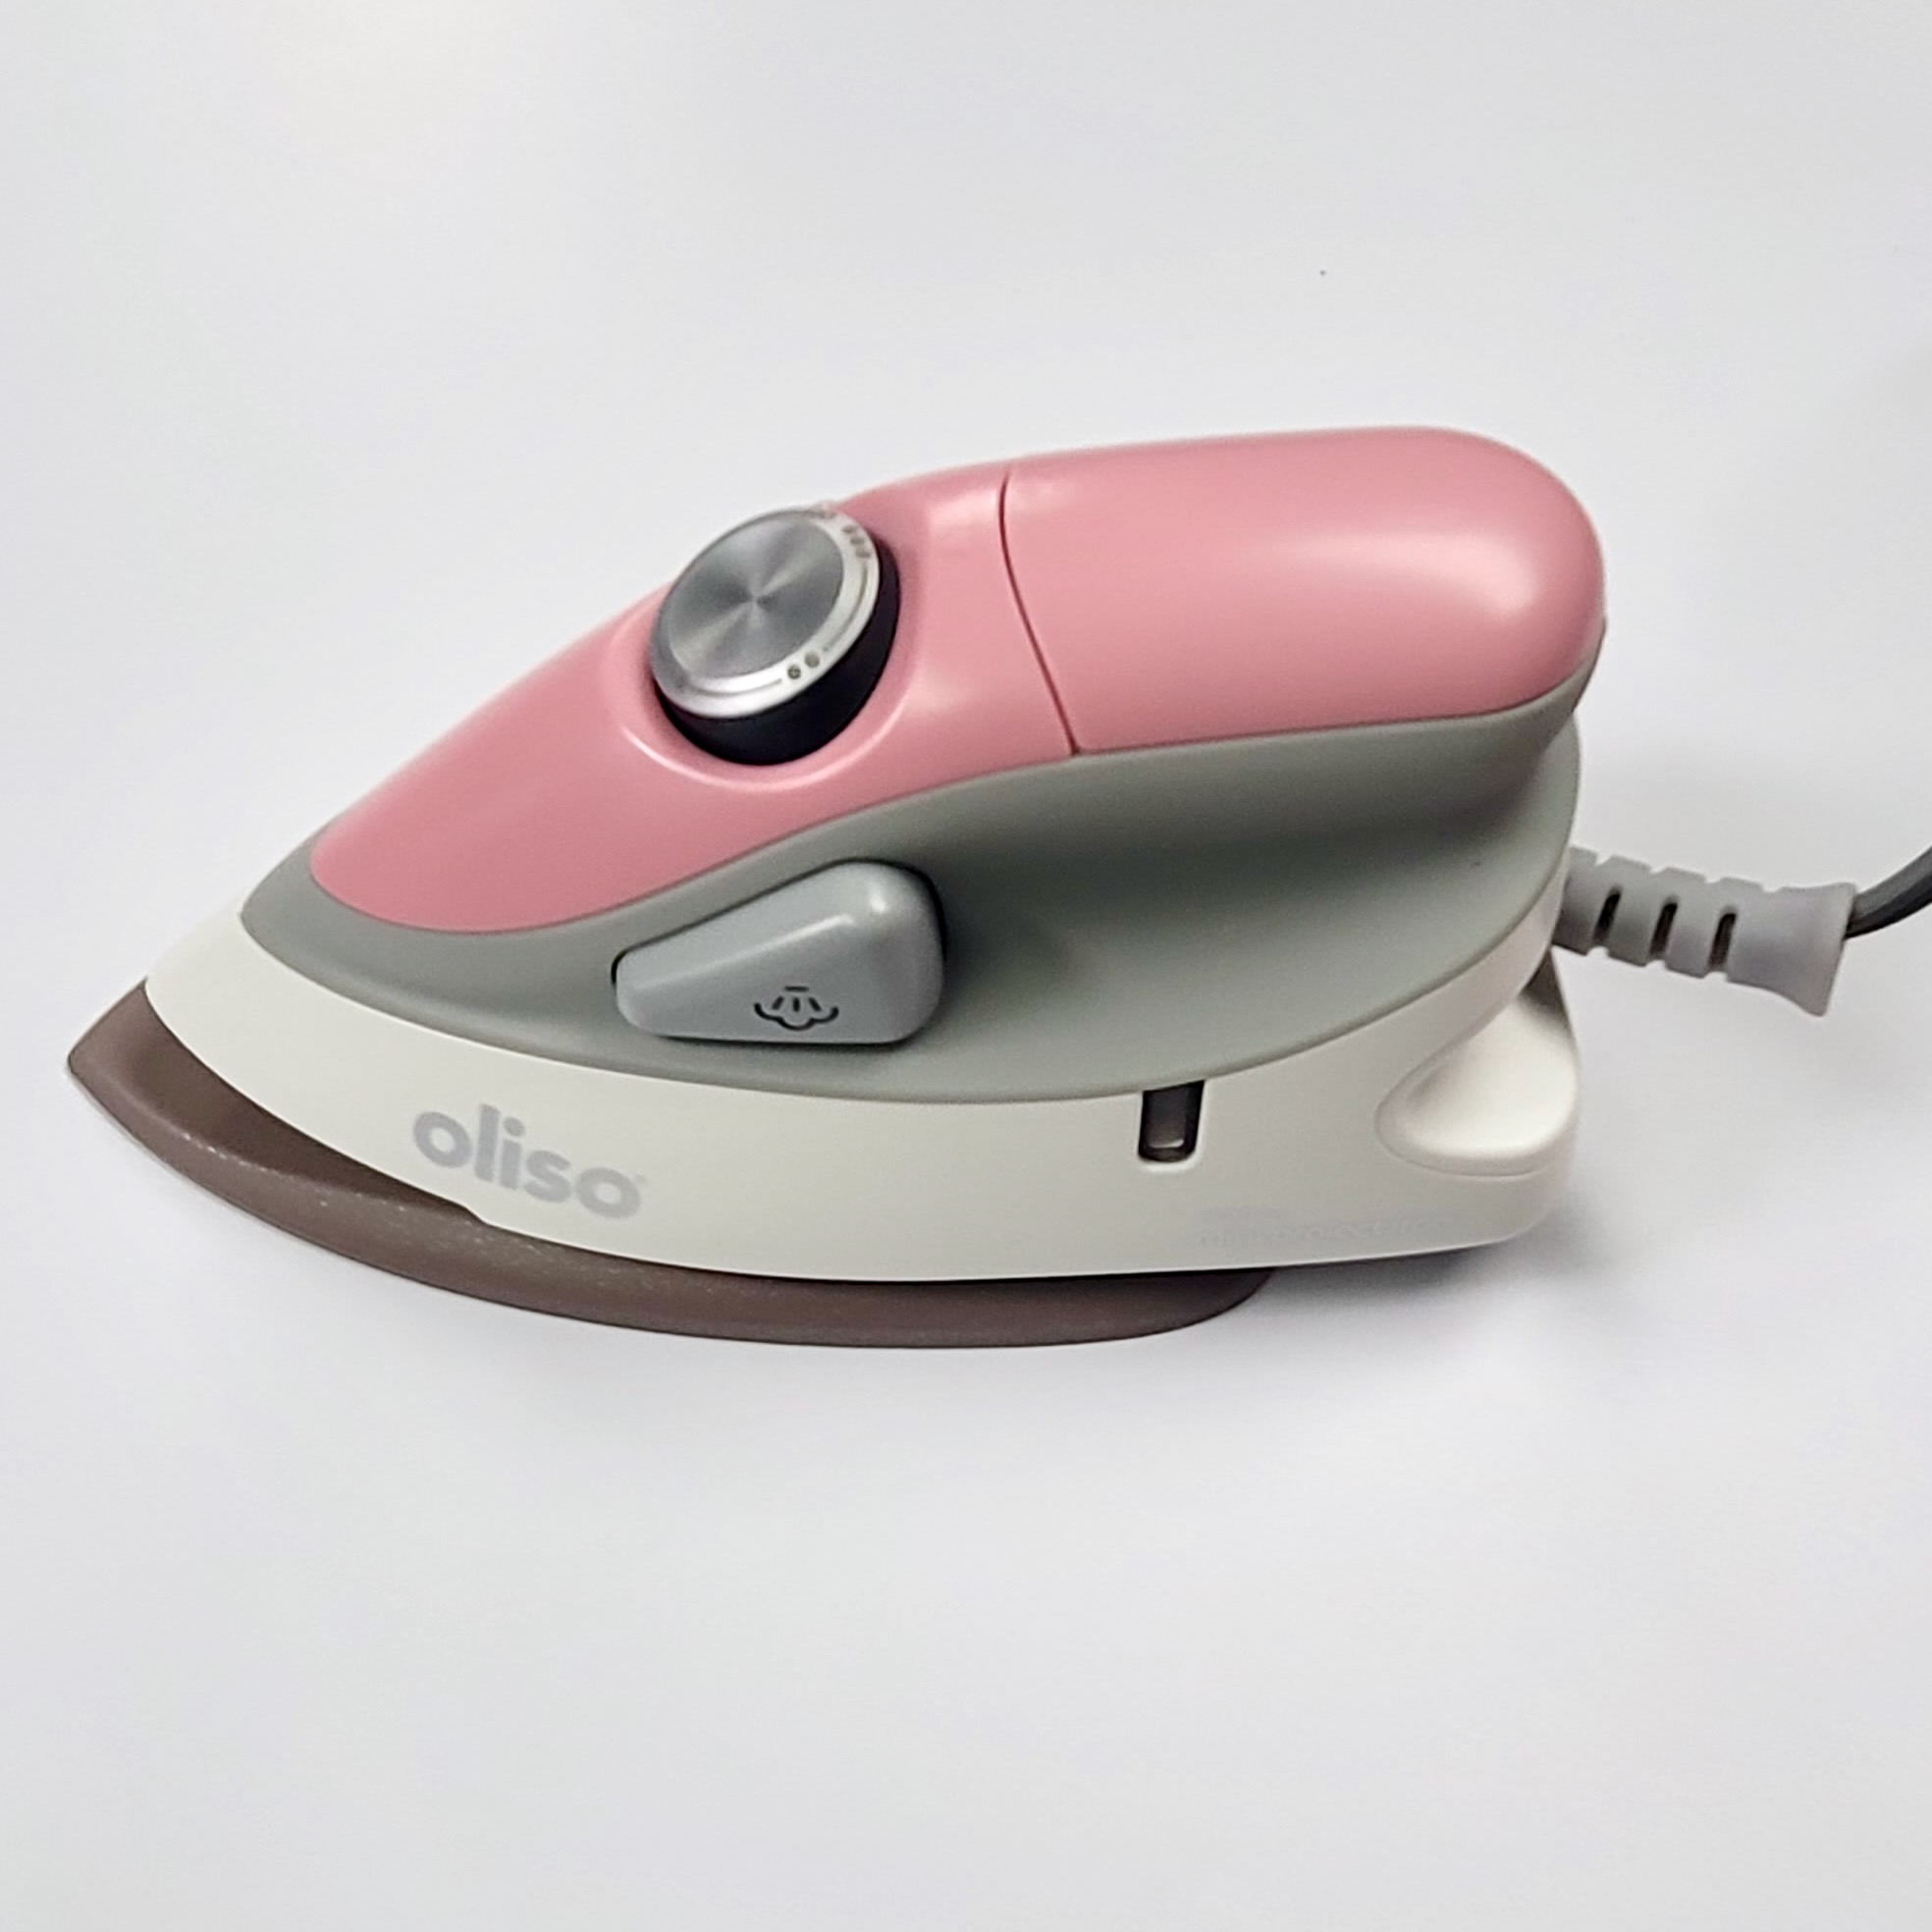 Oliso Mini Iron with Trivet – Quilting Is My Therapy